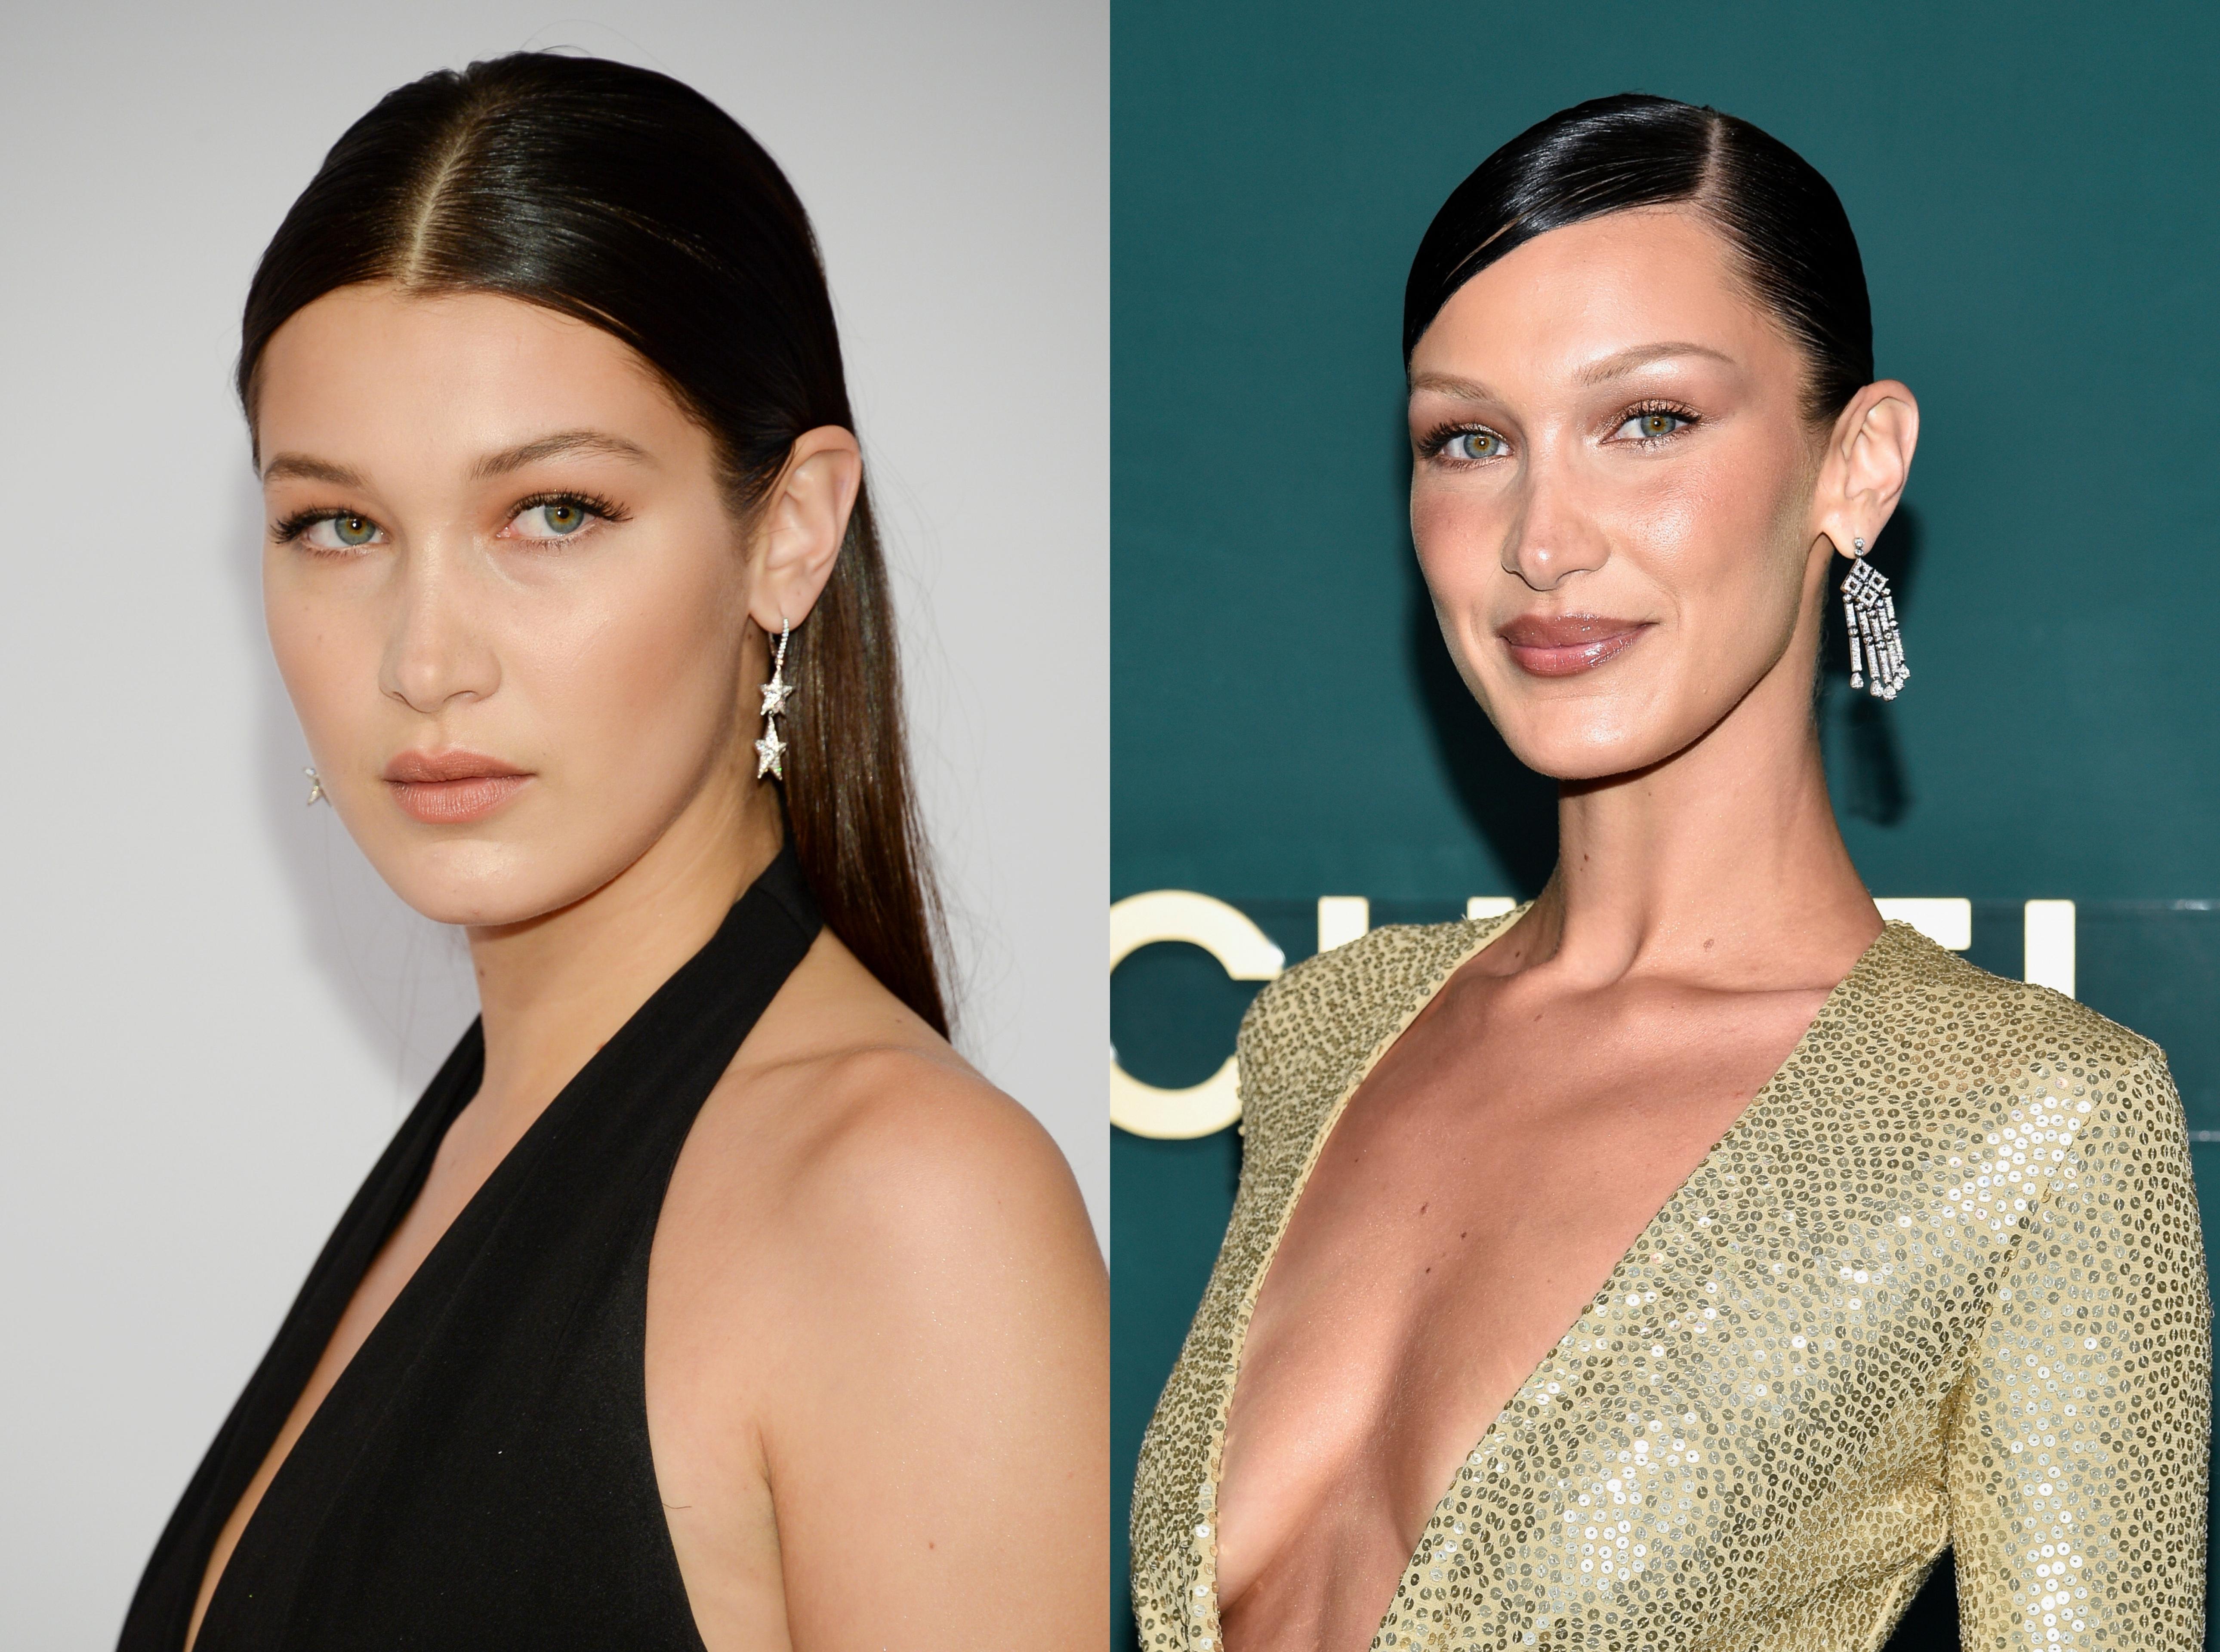 Bella Hadid in 2015 and in 2022